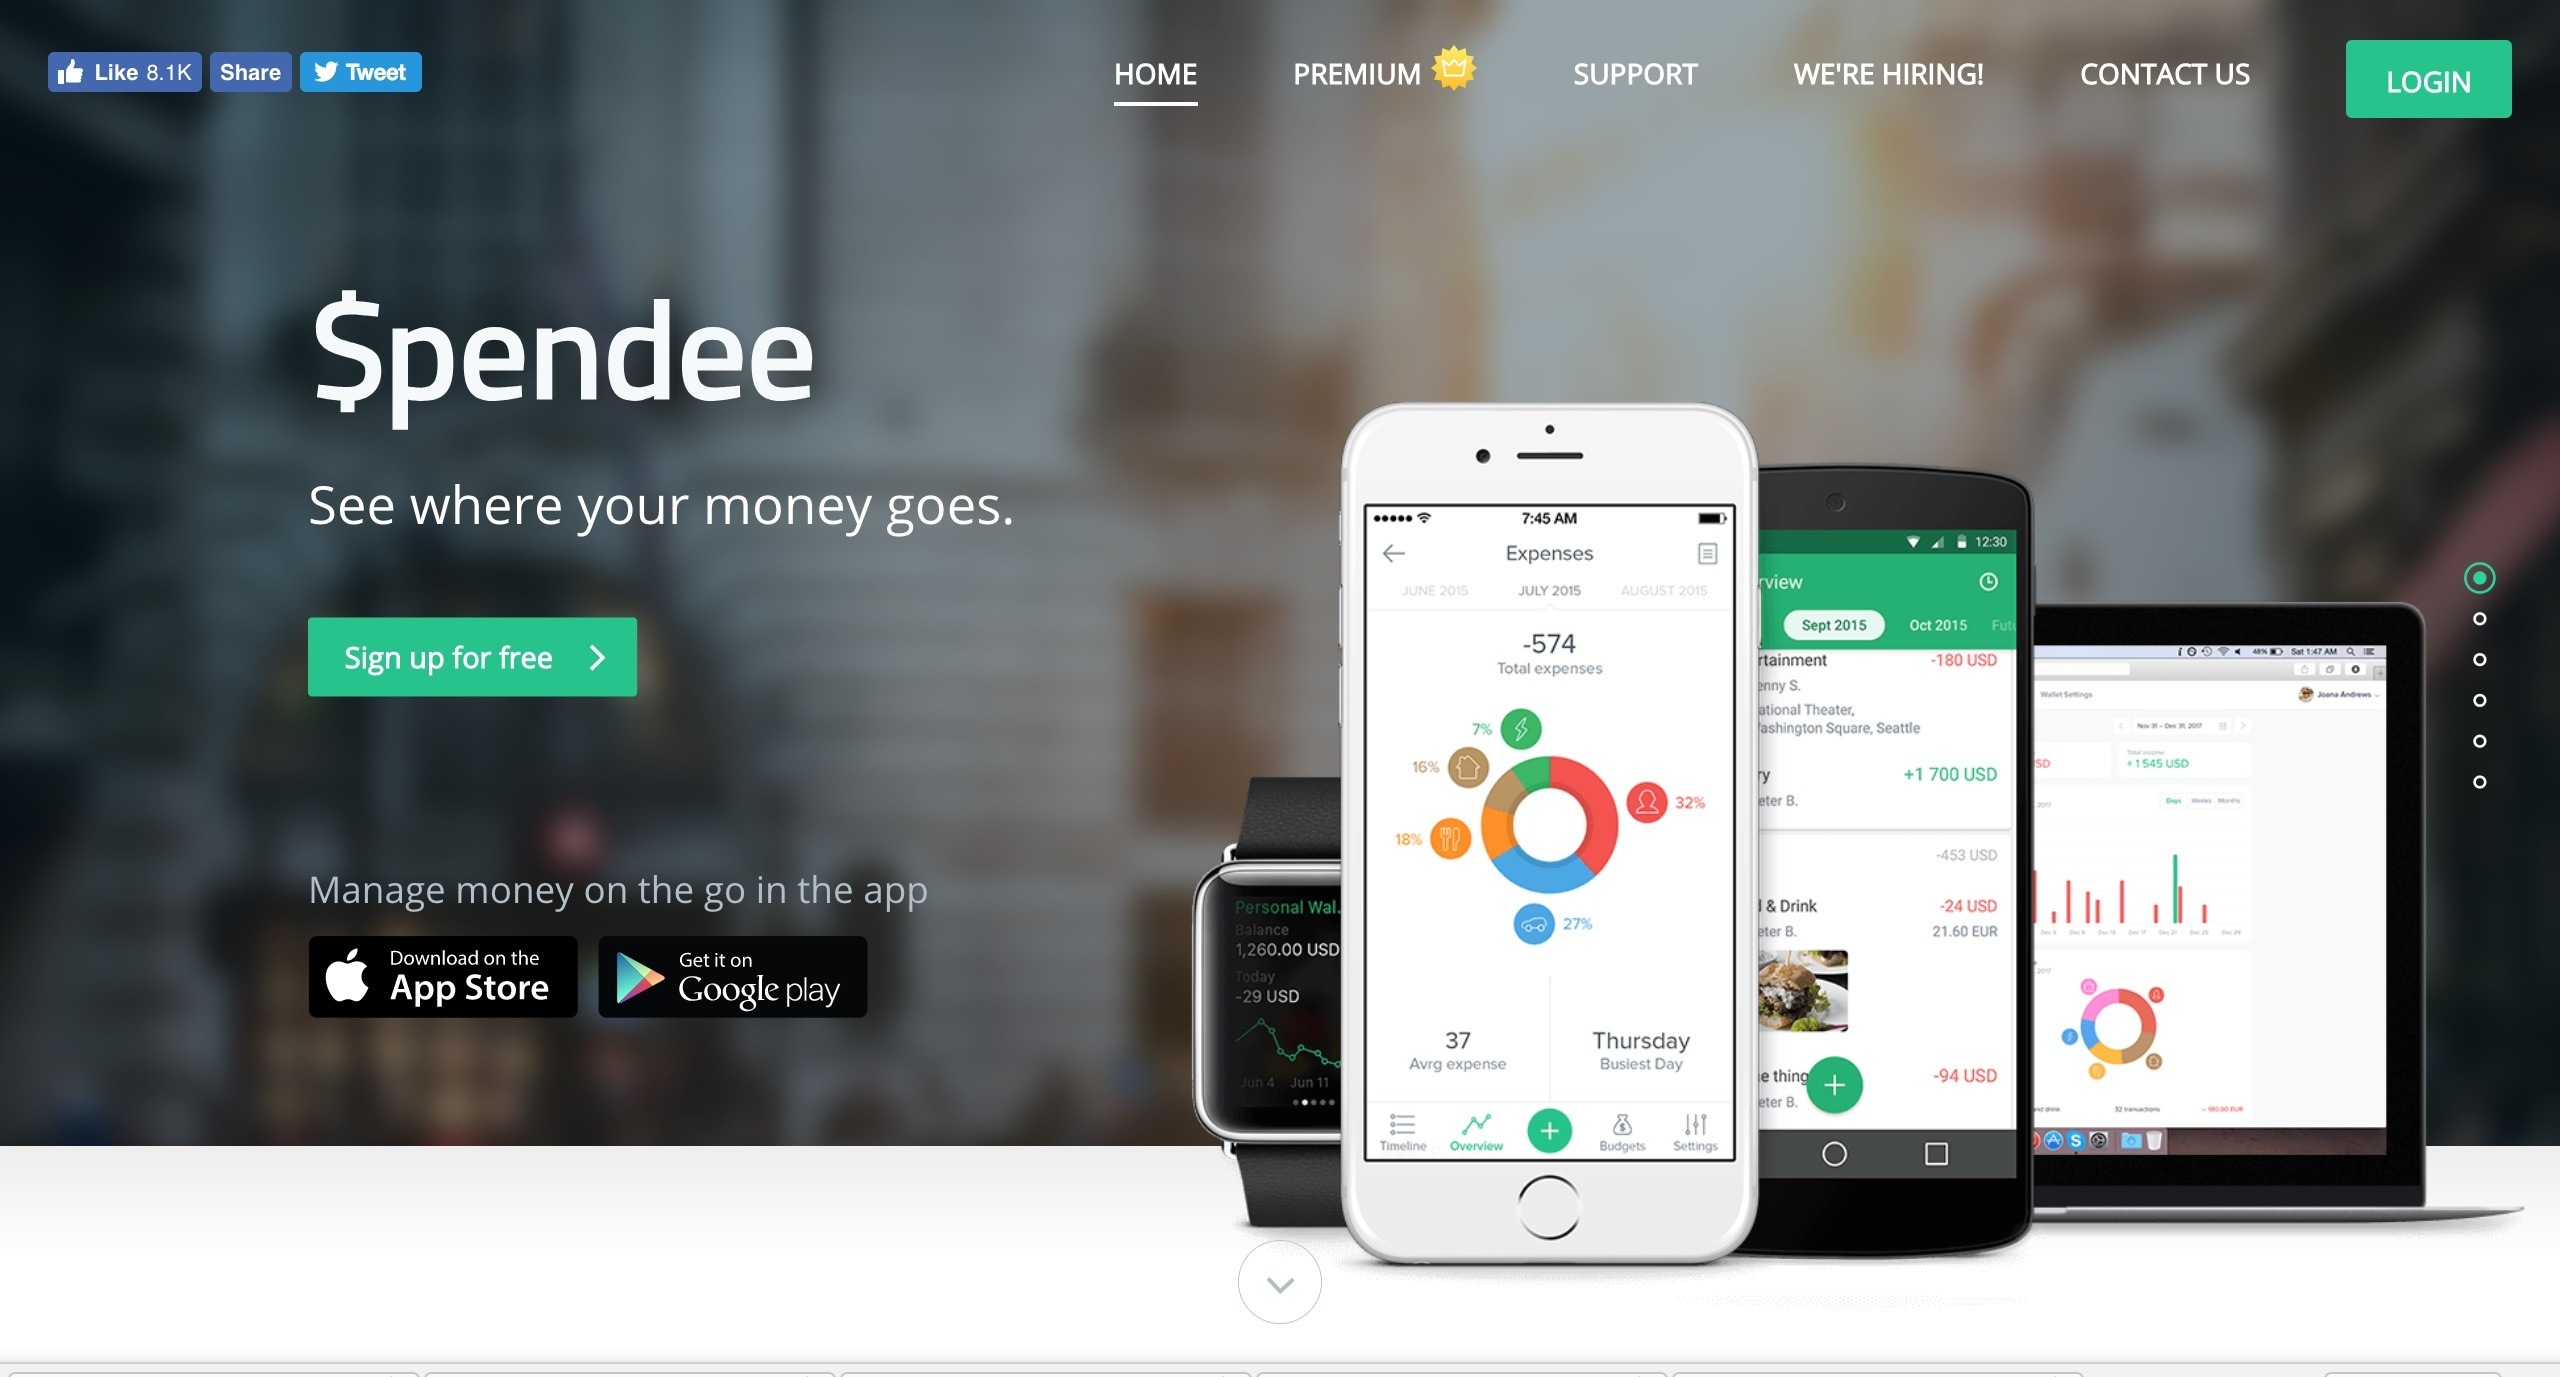 Now You Can 100% Monitor Your Spending and Bank Accounts With This App